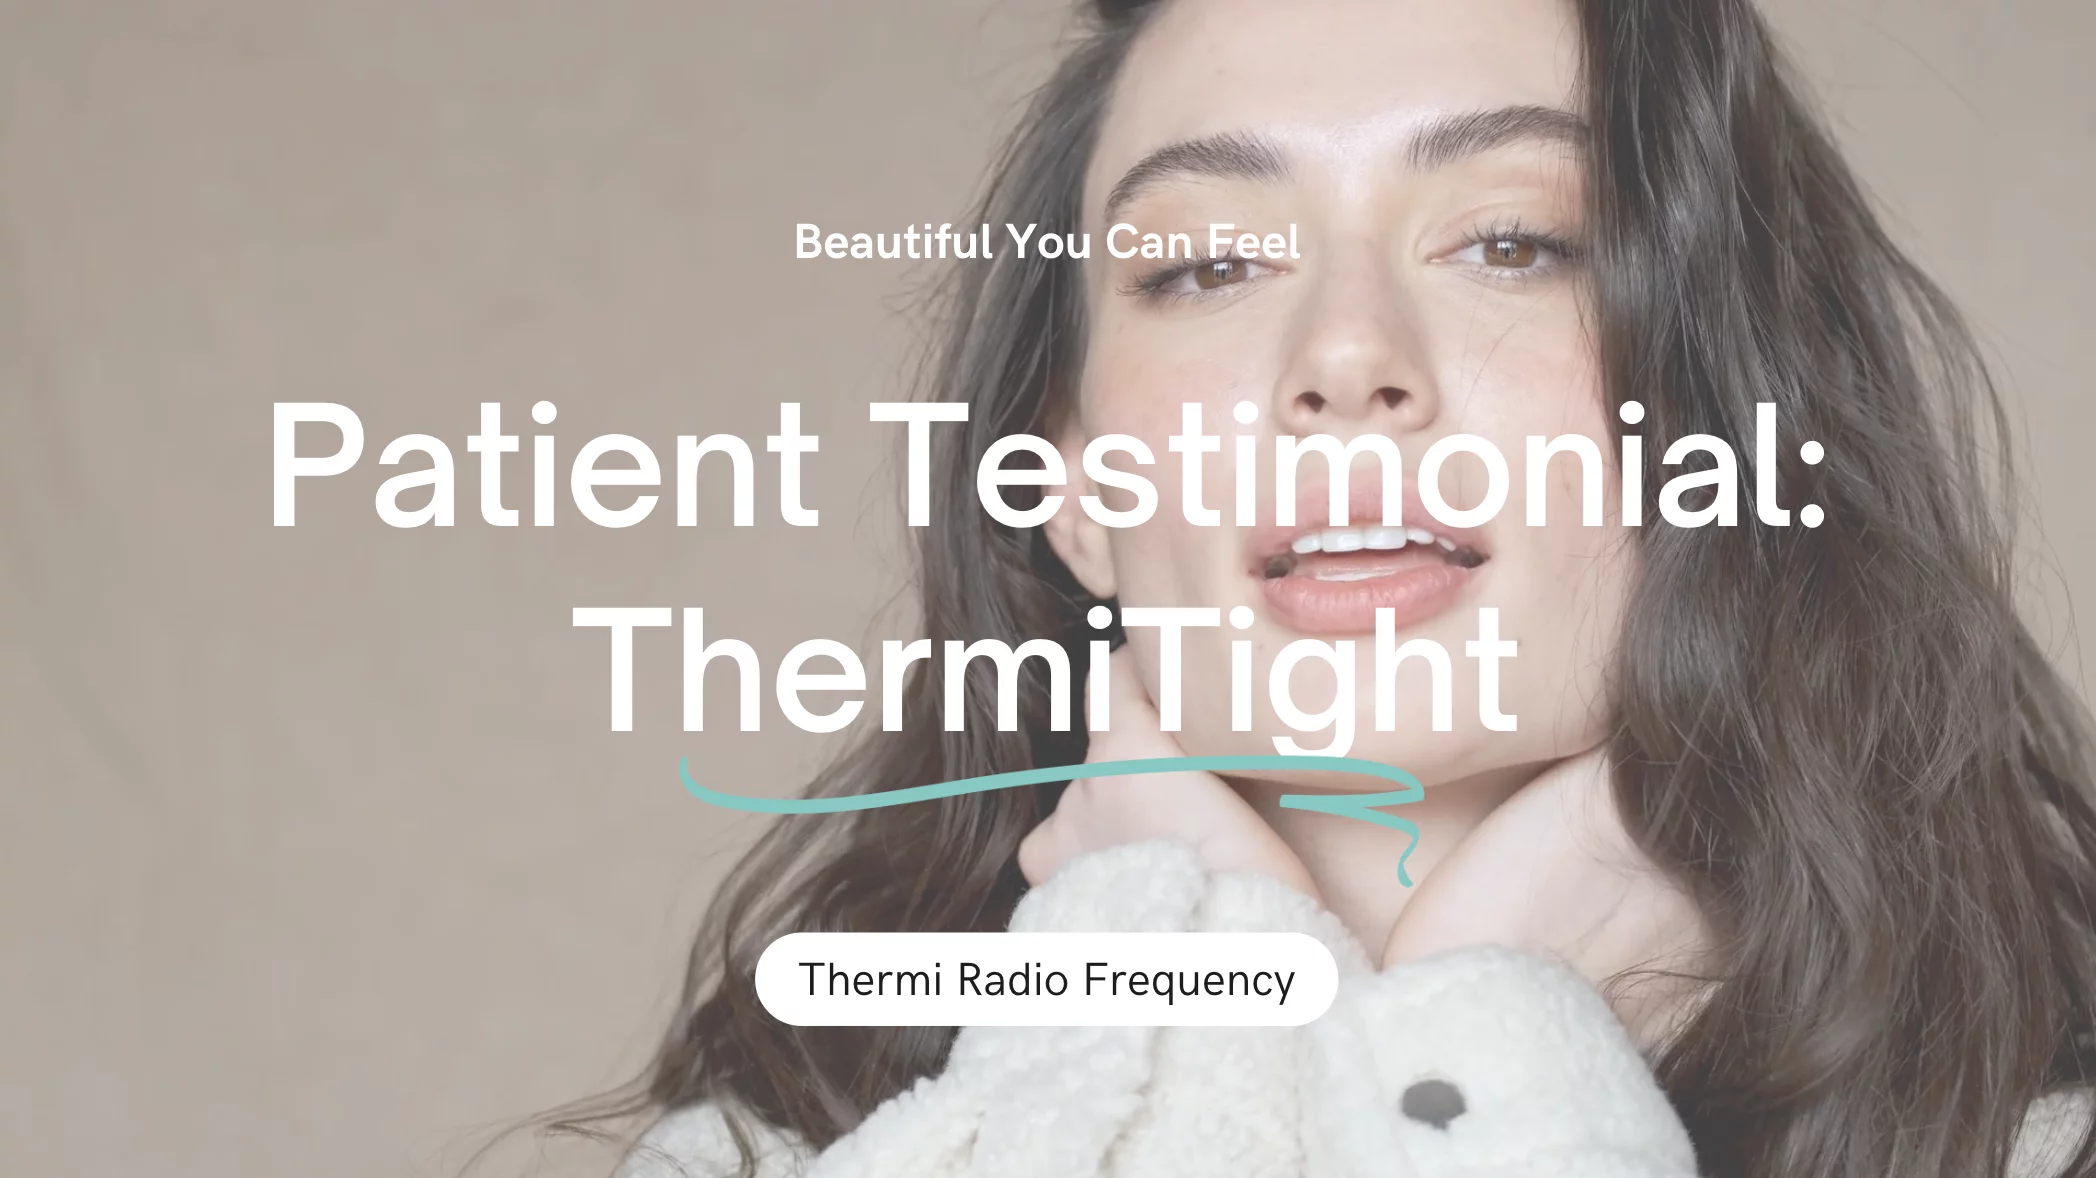 All You Need to Know About Radio Frequency Skin Tightening - Veritas  Backstage: Beauty & Wellness Institute